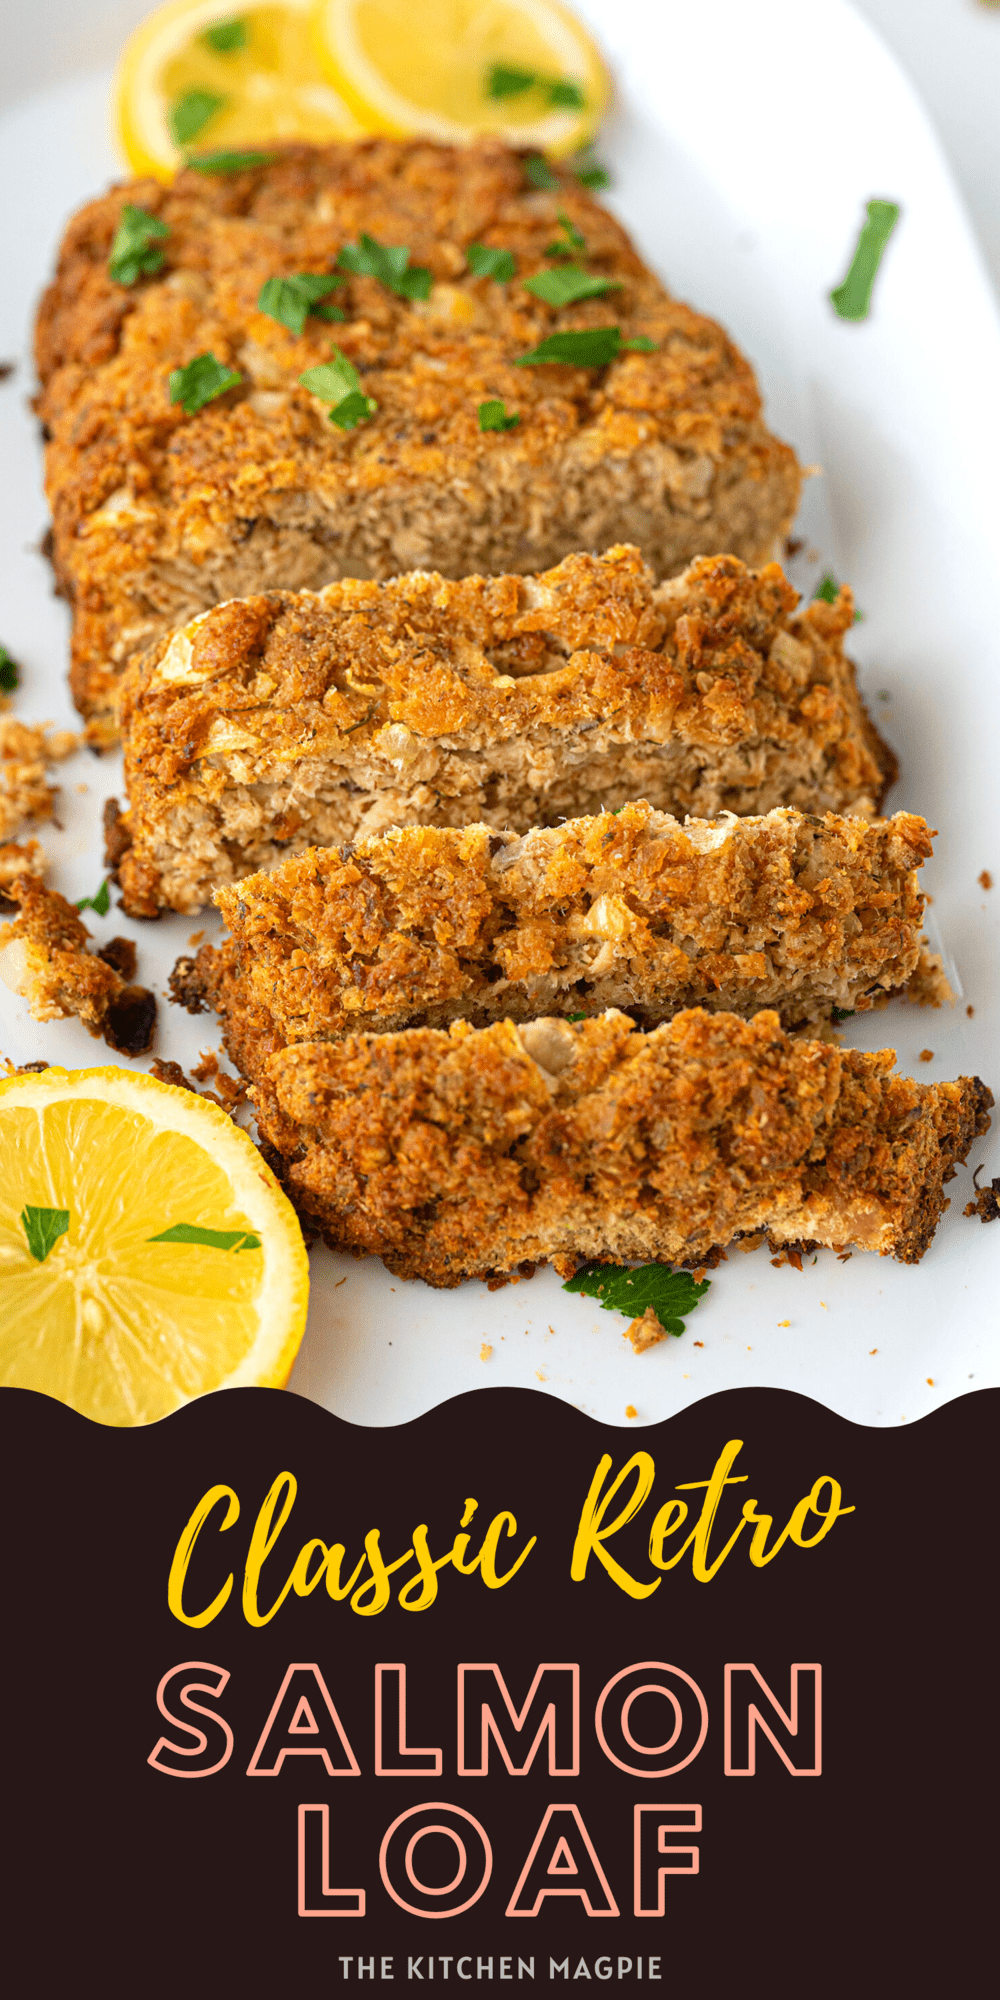 Salmon loaf is one of those classic retro recipes that is still just as delicious today as it was when our Grandma's made them! Try this instead of salmon cakes, it's easier than frying up individual cakes and bakes up great!